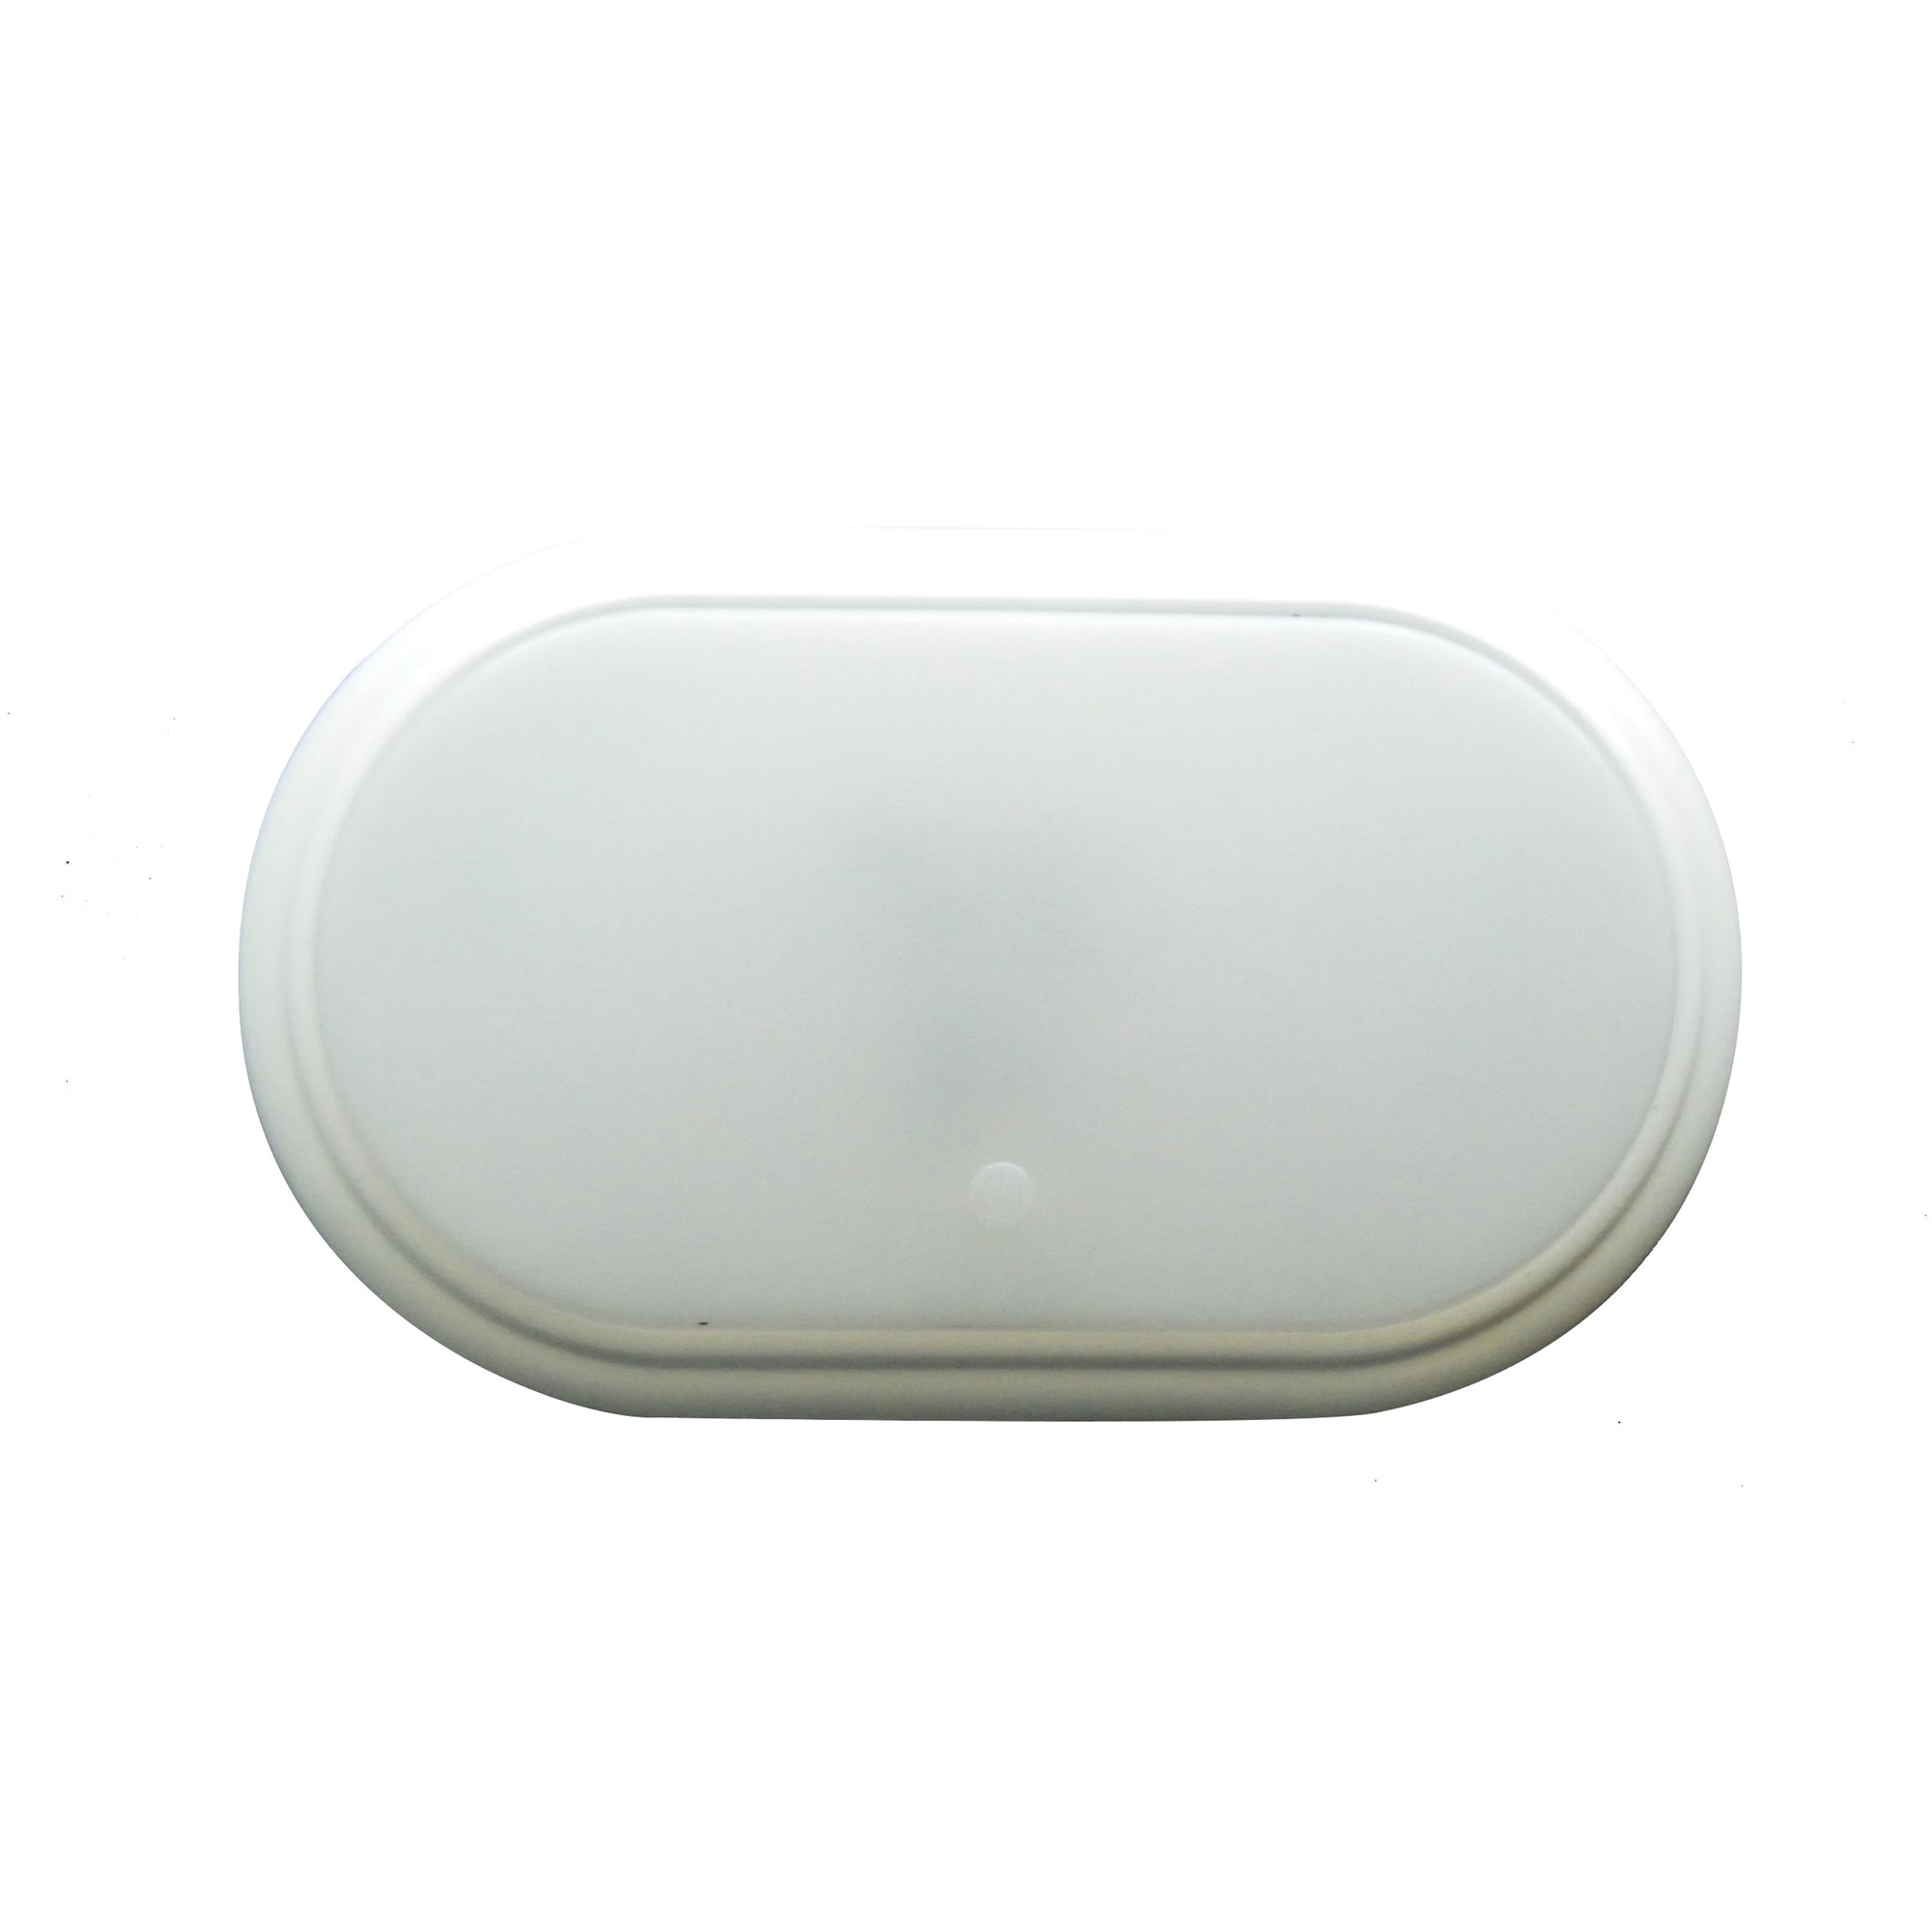 Fasteners Unlimited 001-1030WS Surface Mount LED Oval Ceiling/Under-Cabinet Light With Switch - White, 8.15 in. x 4.8 in.